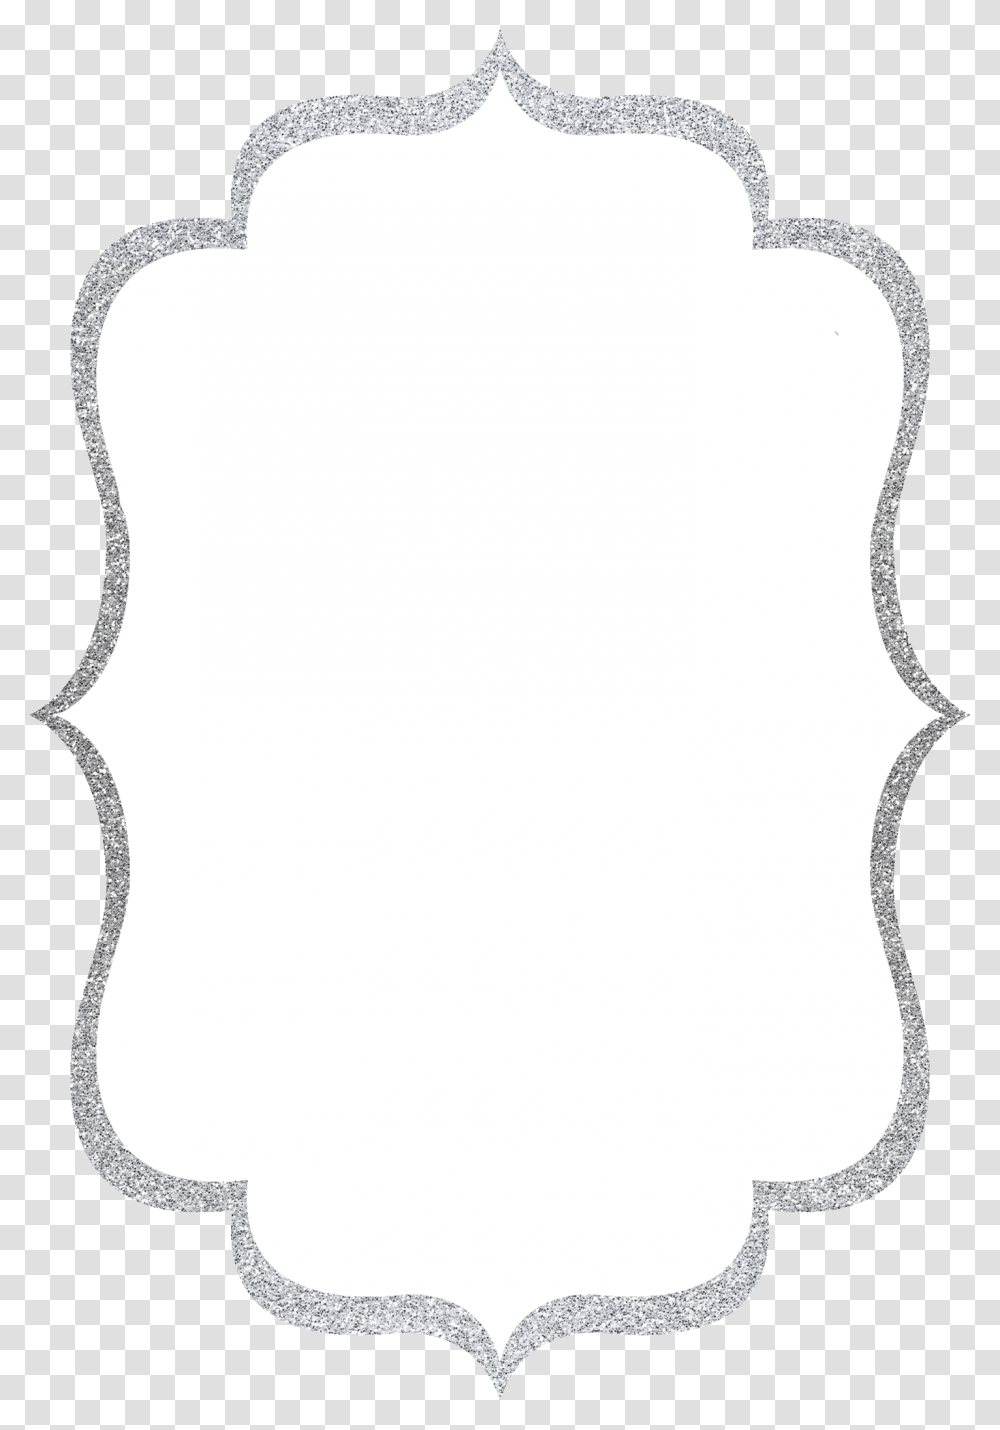 Royal Frame Border, Knot, Rope, Chain Transparent Png